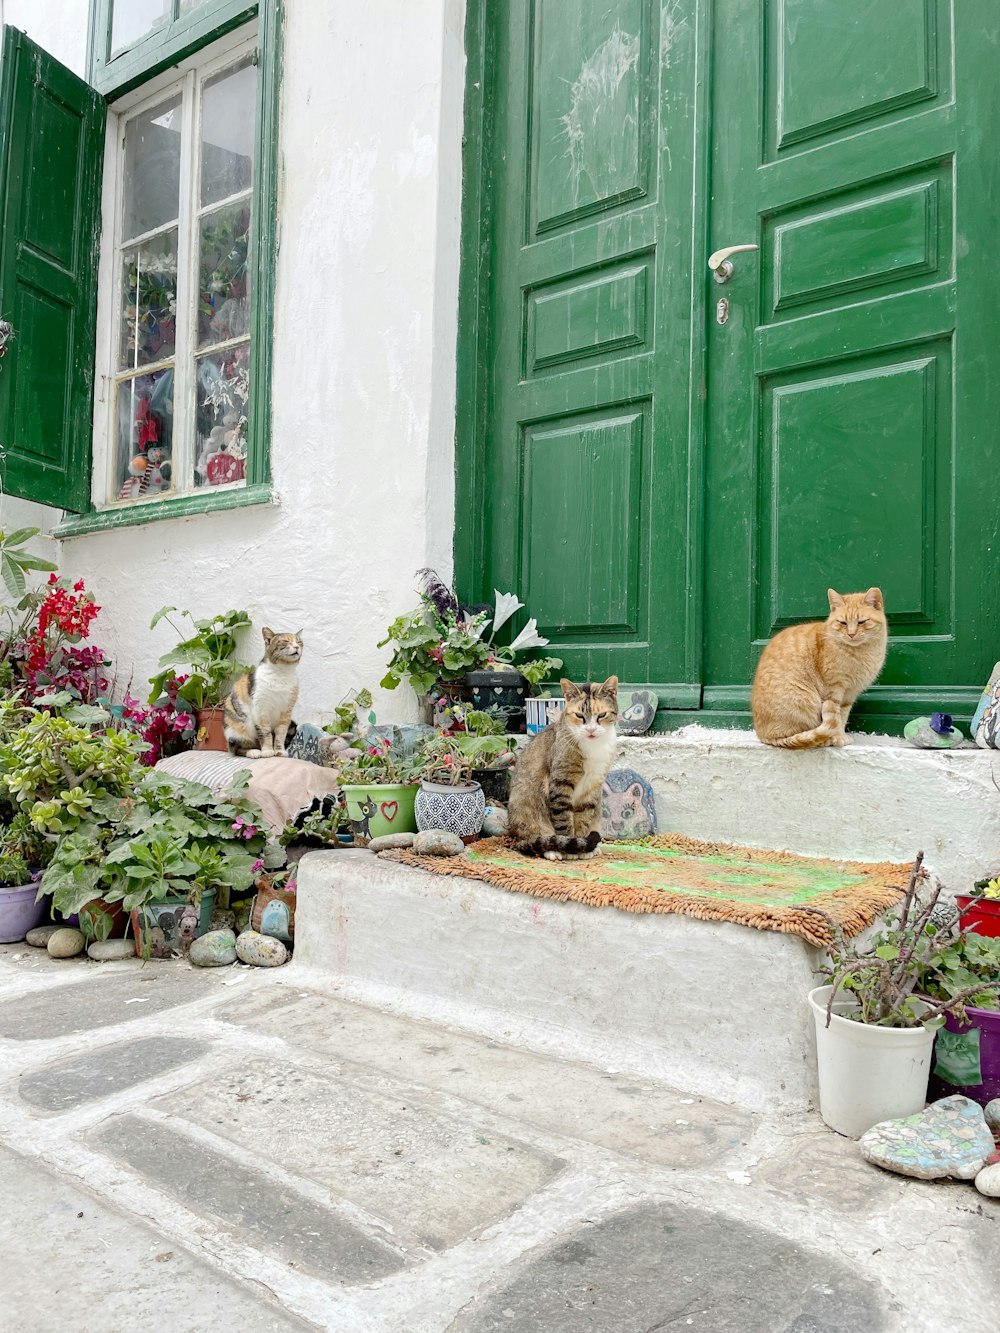 a group of cats sitting on a step in front of a green door